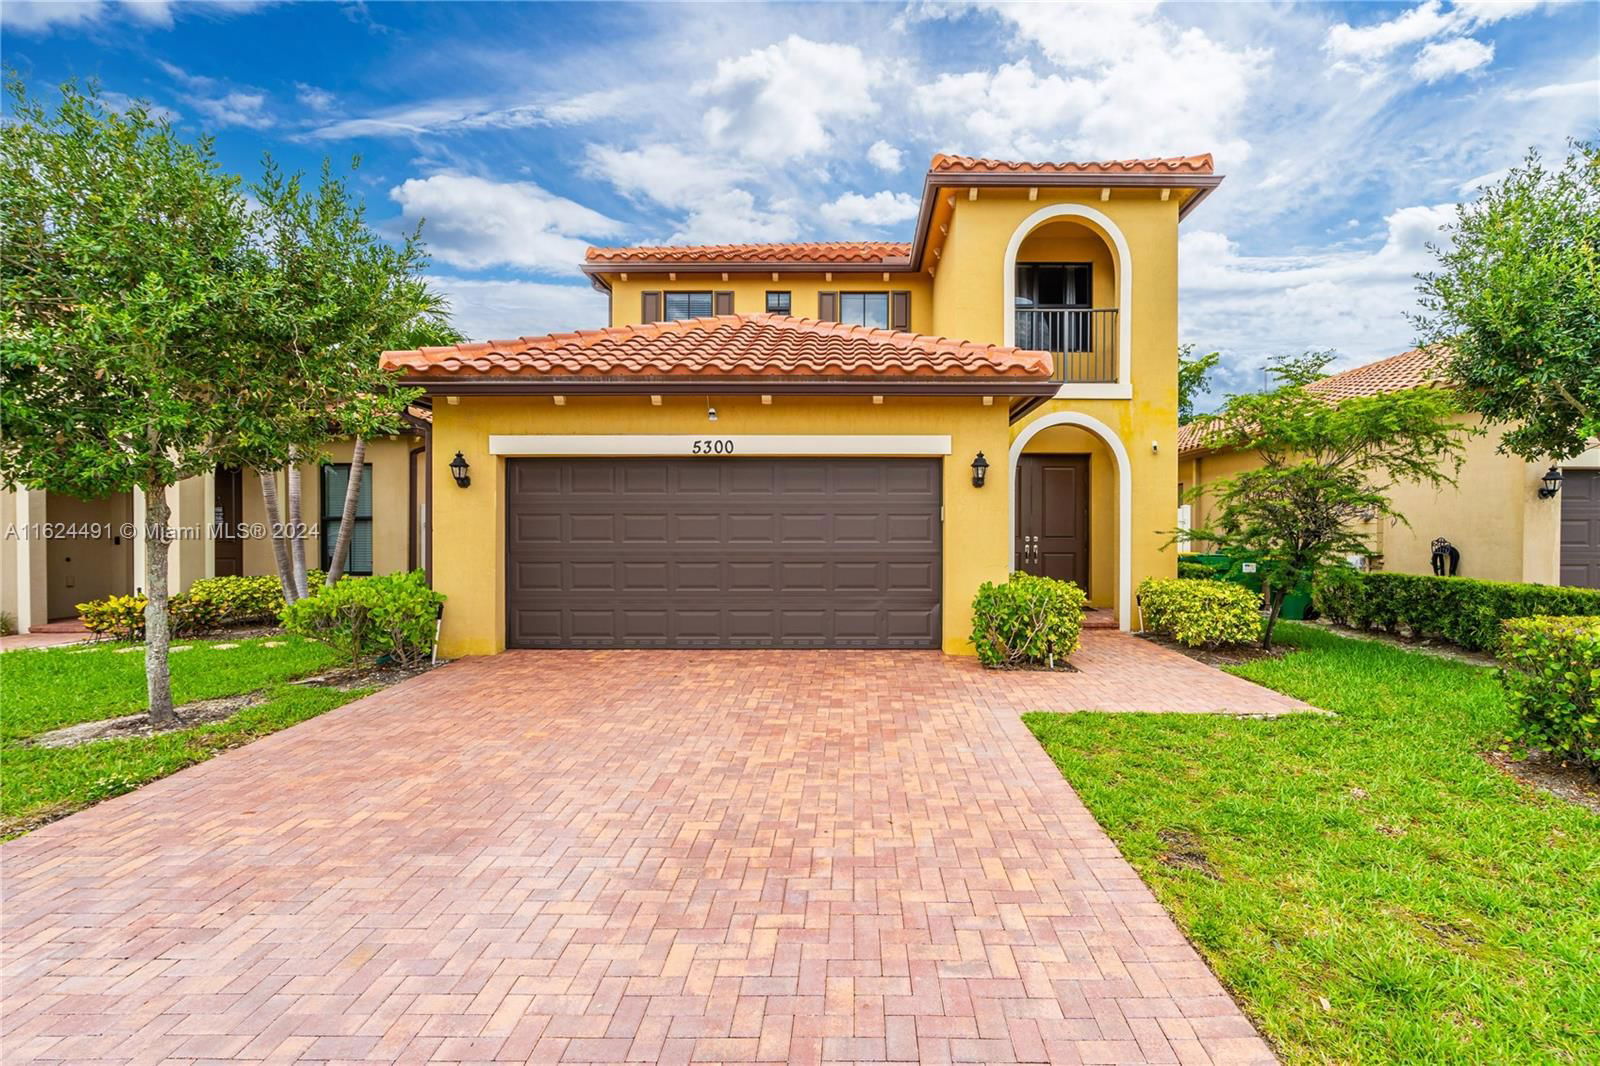 Real estate property located at 5300 48th Ln, Broward County, CENTRAL PARC SOUTH, Tamarac, FL